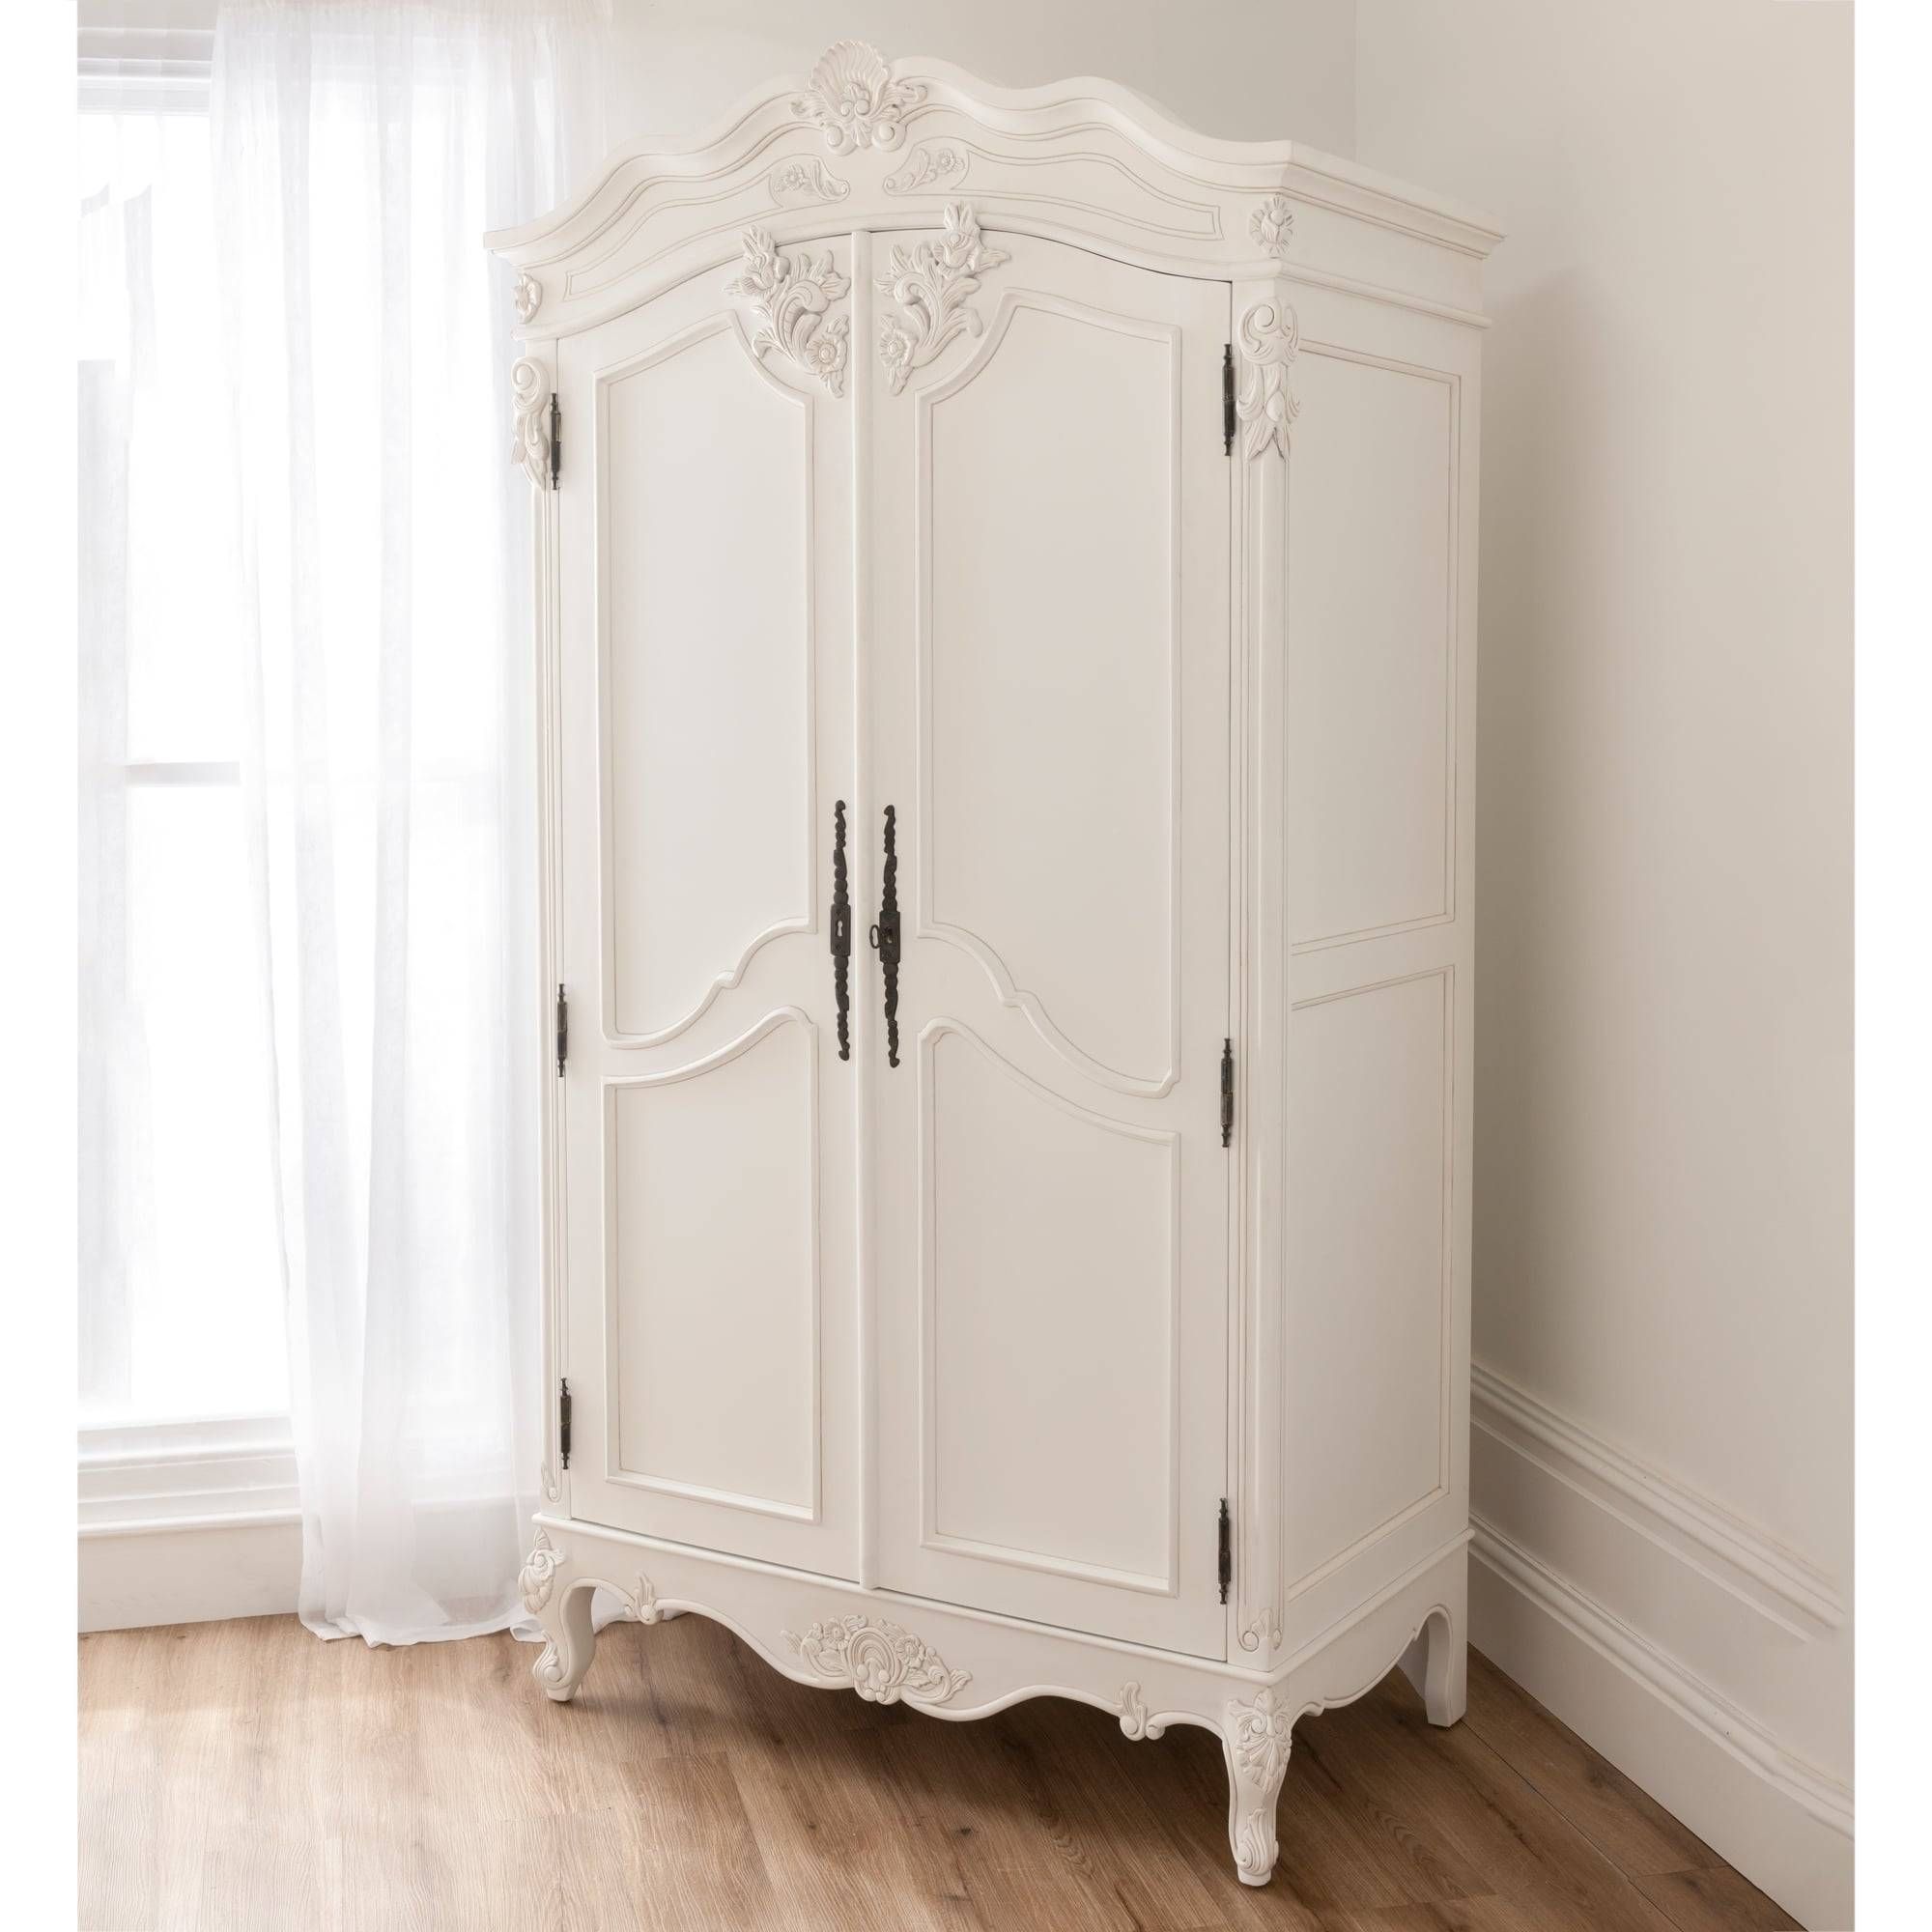 Rattan Antique French Style Wardrobe | Shabby Chic Bedroom Within White Wardrobes French Style (View 2 of 15)